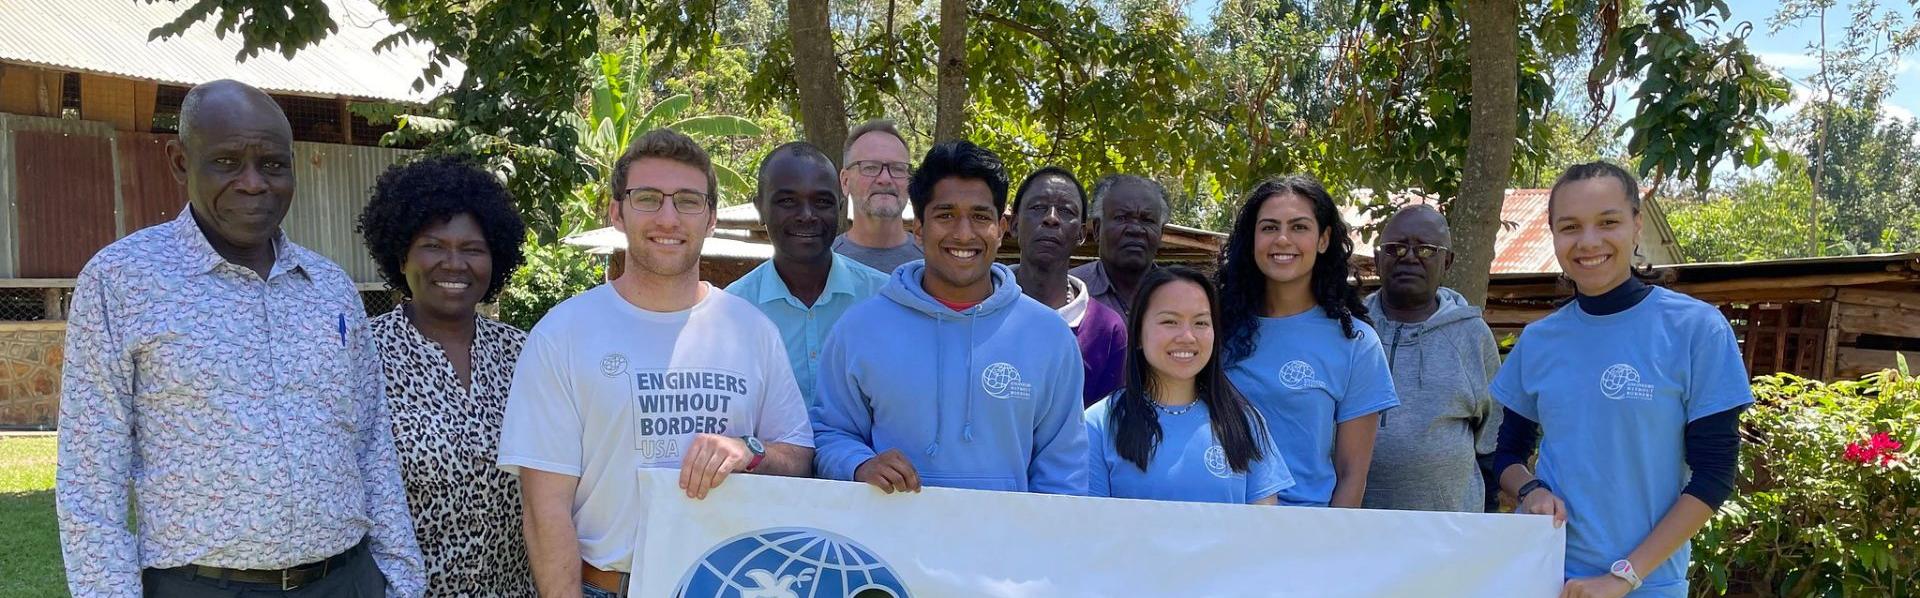 Engineers without Borders in Kenya, group photo with banner